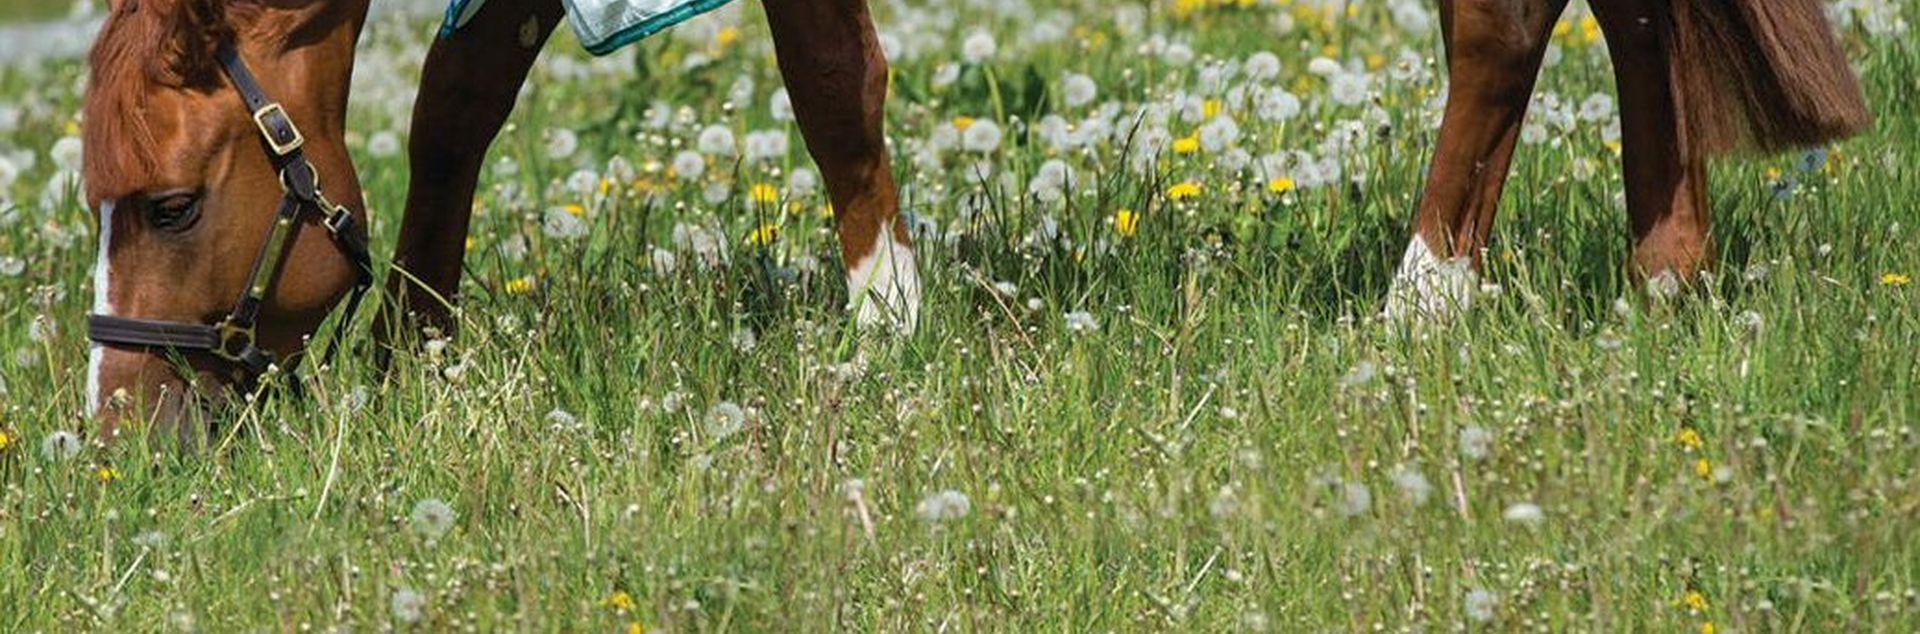 Horse Worming – How To Guide